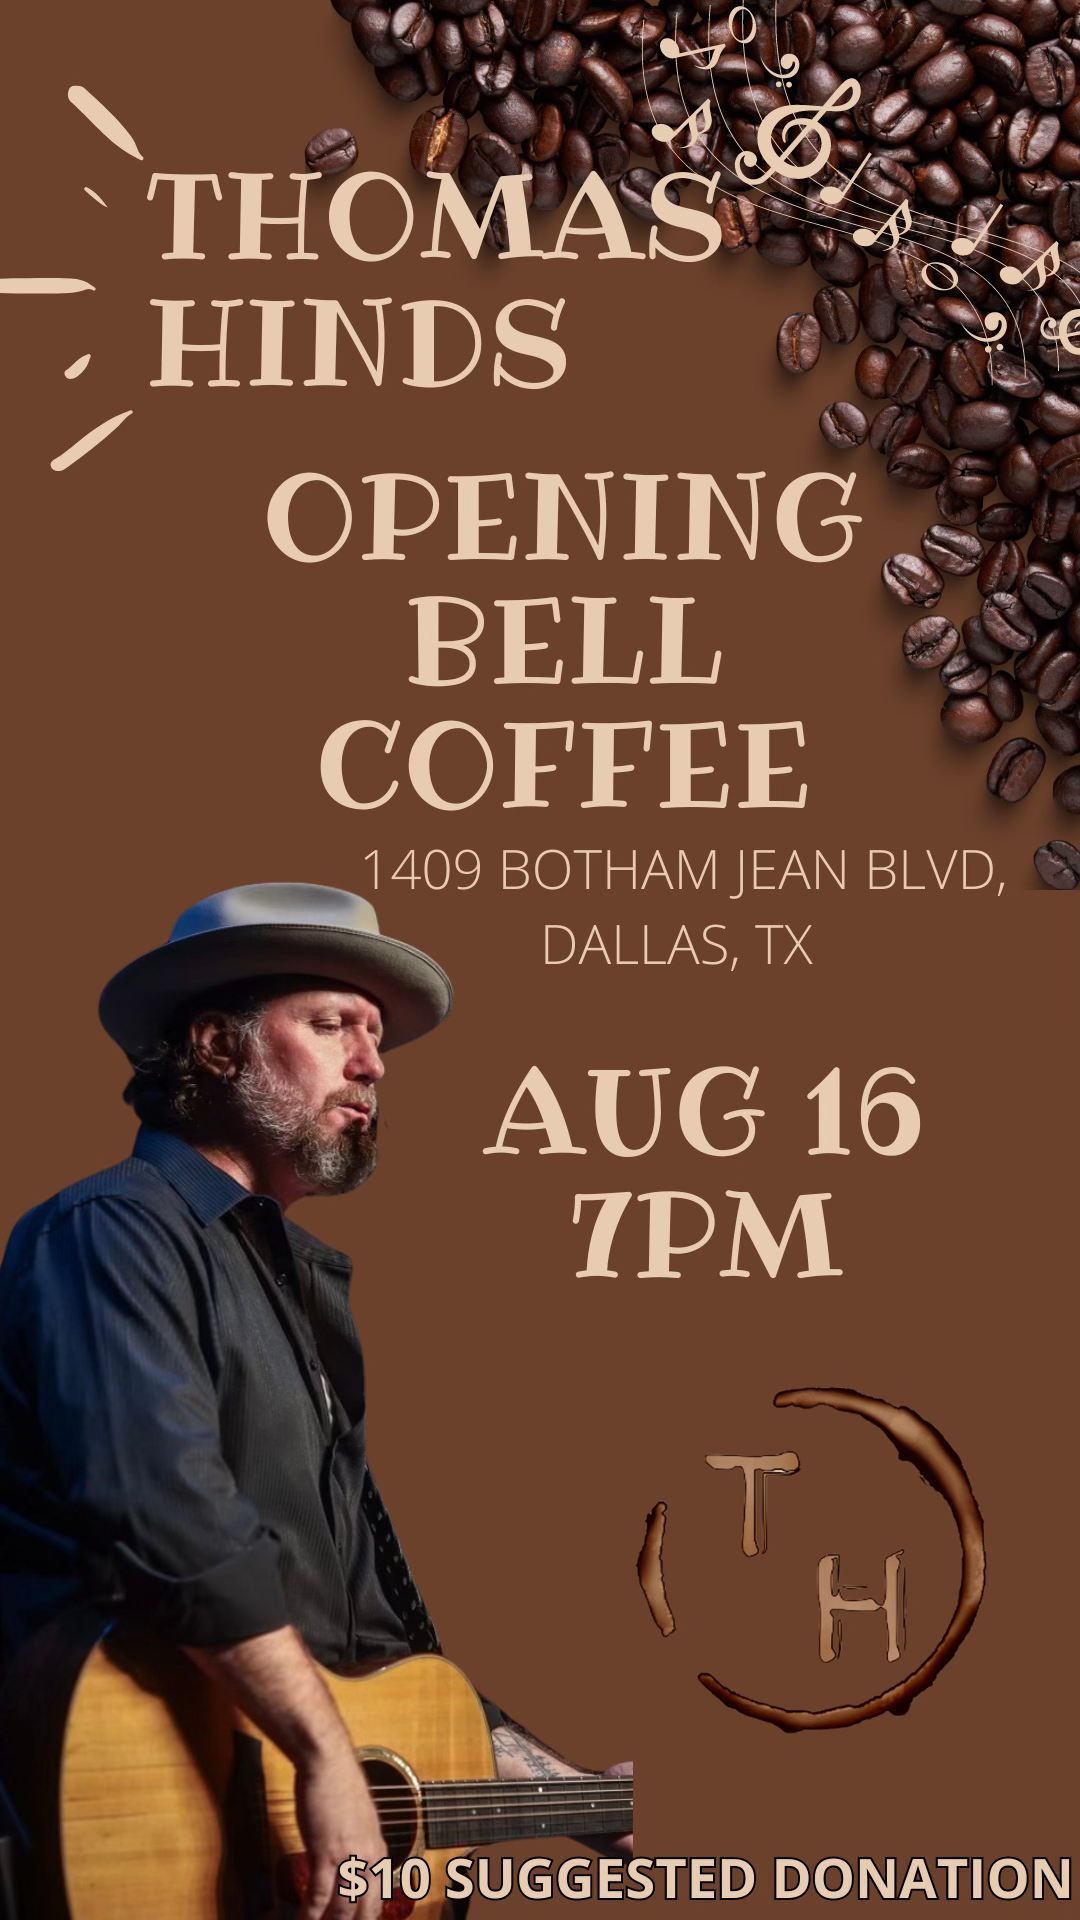 Live at Opening Bell Coffee in Dallas Tx